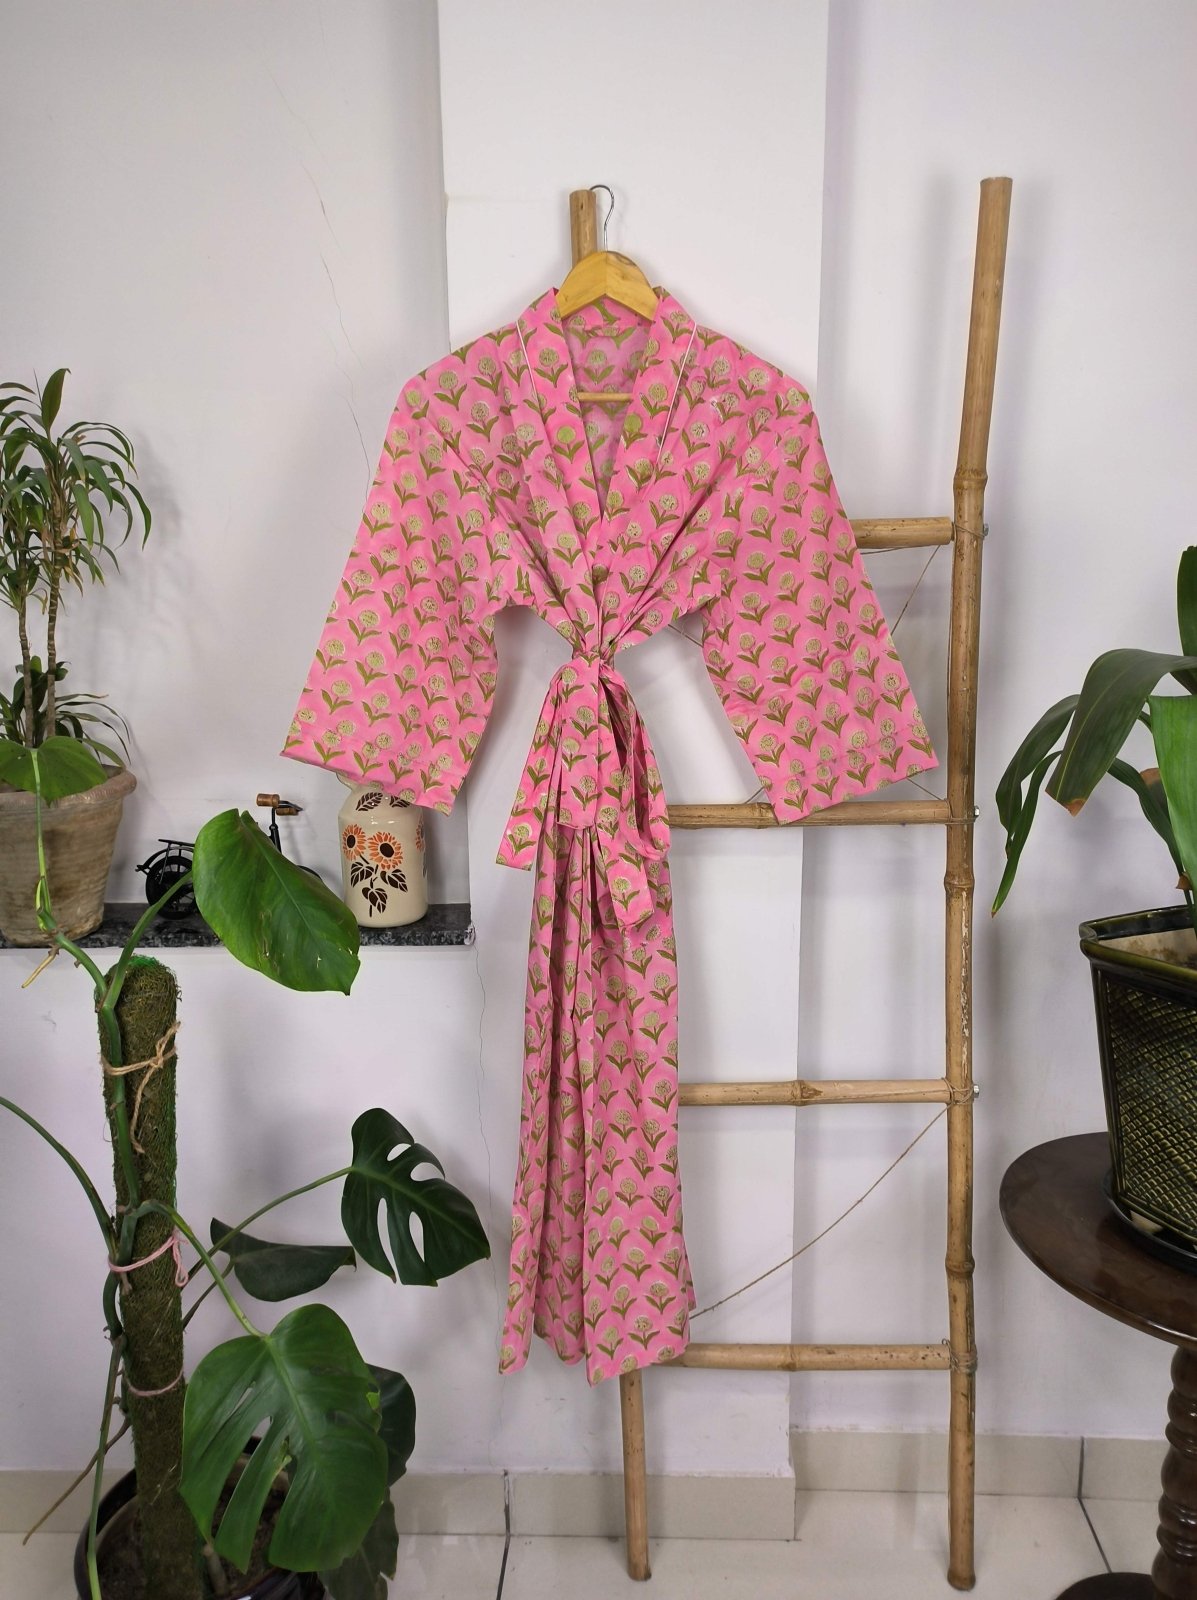 Boho House Robe Indian Handprinted Cotton Kimono Pink Yellow Floral | Perfect for Summer Luxury Beach Holidays Yacht Cover Up Stunning Dress - The Eastern Loom